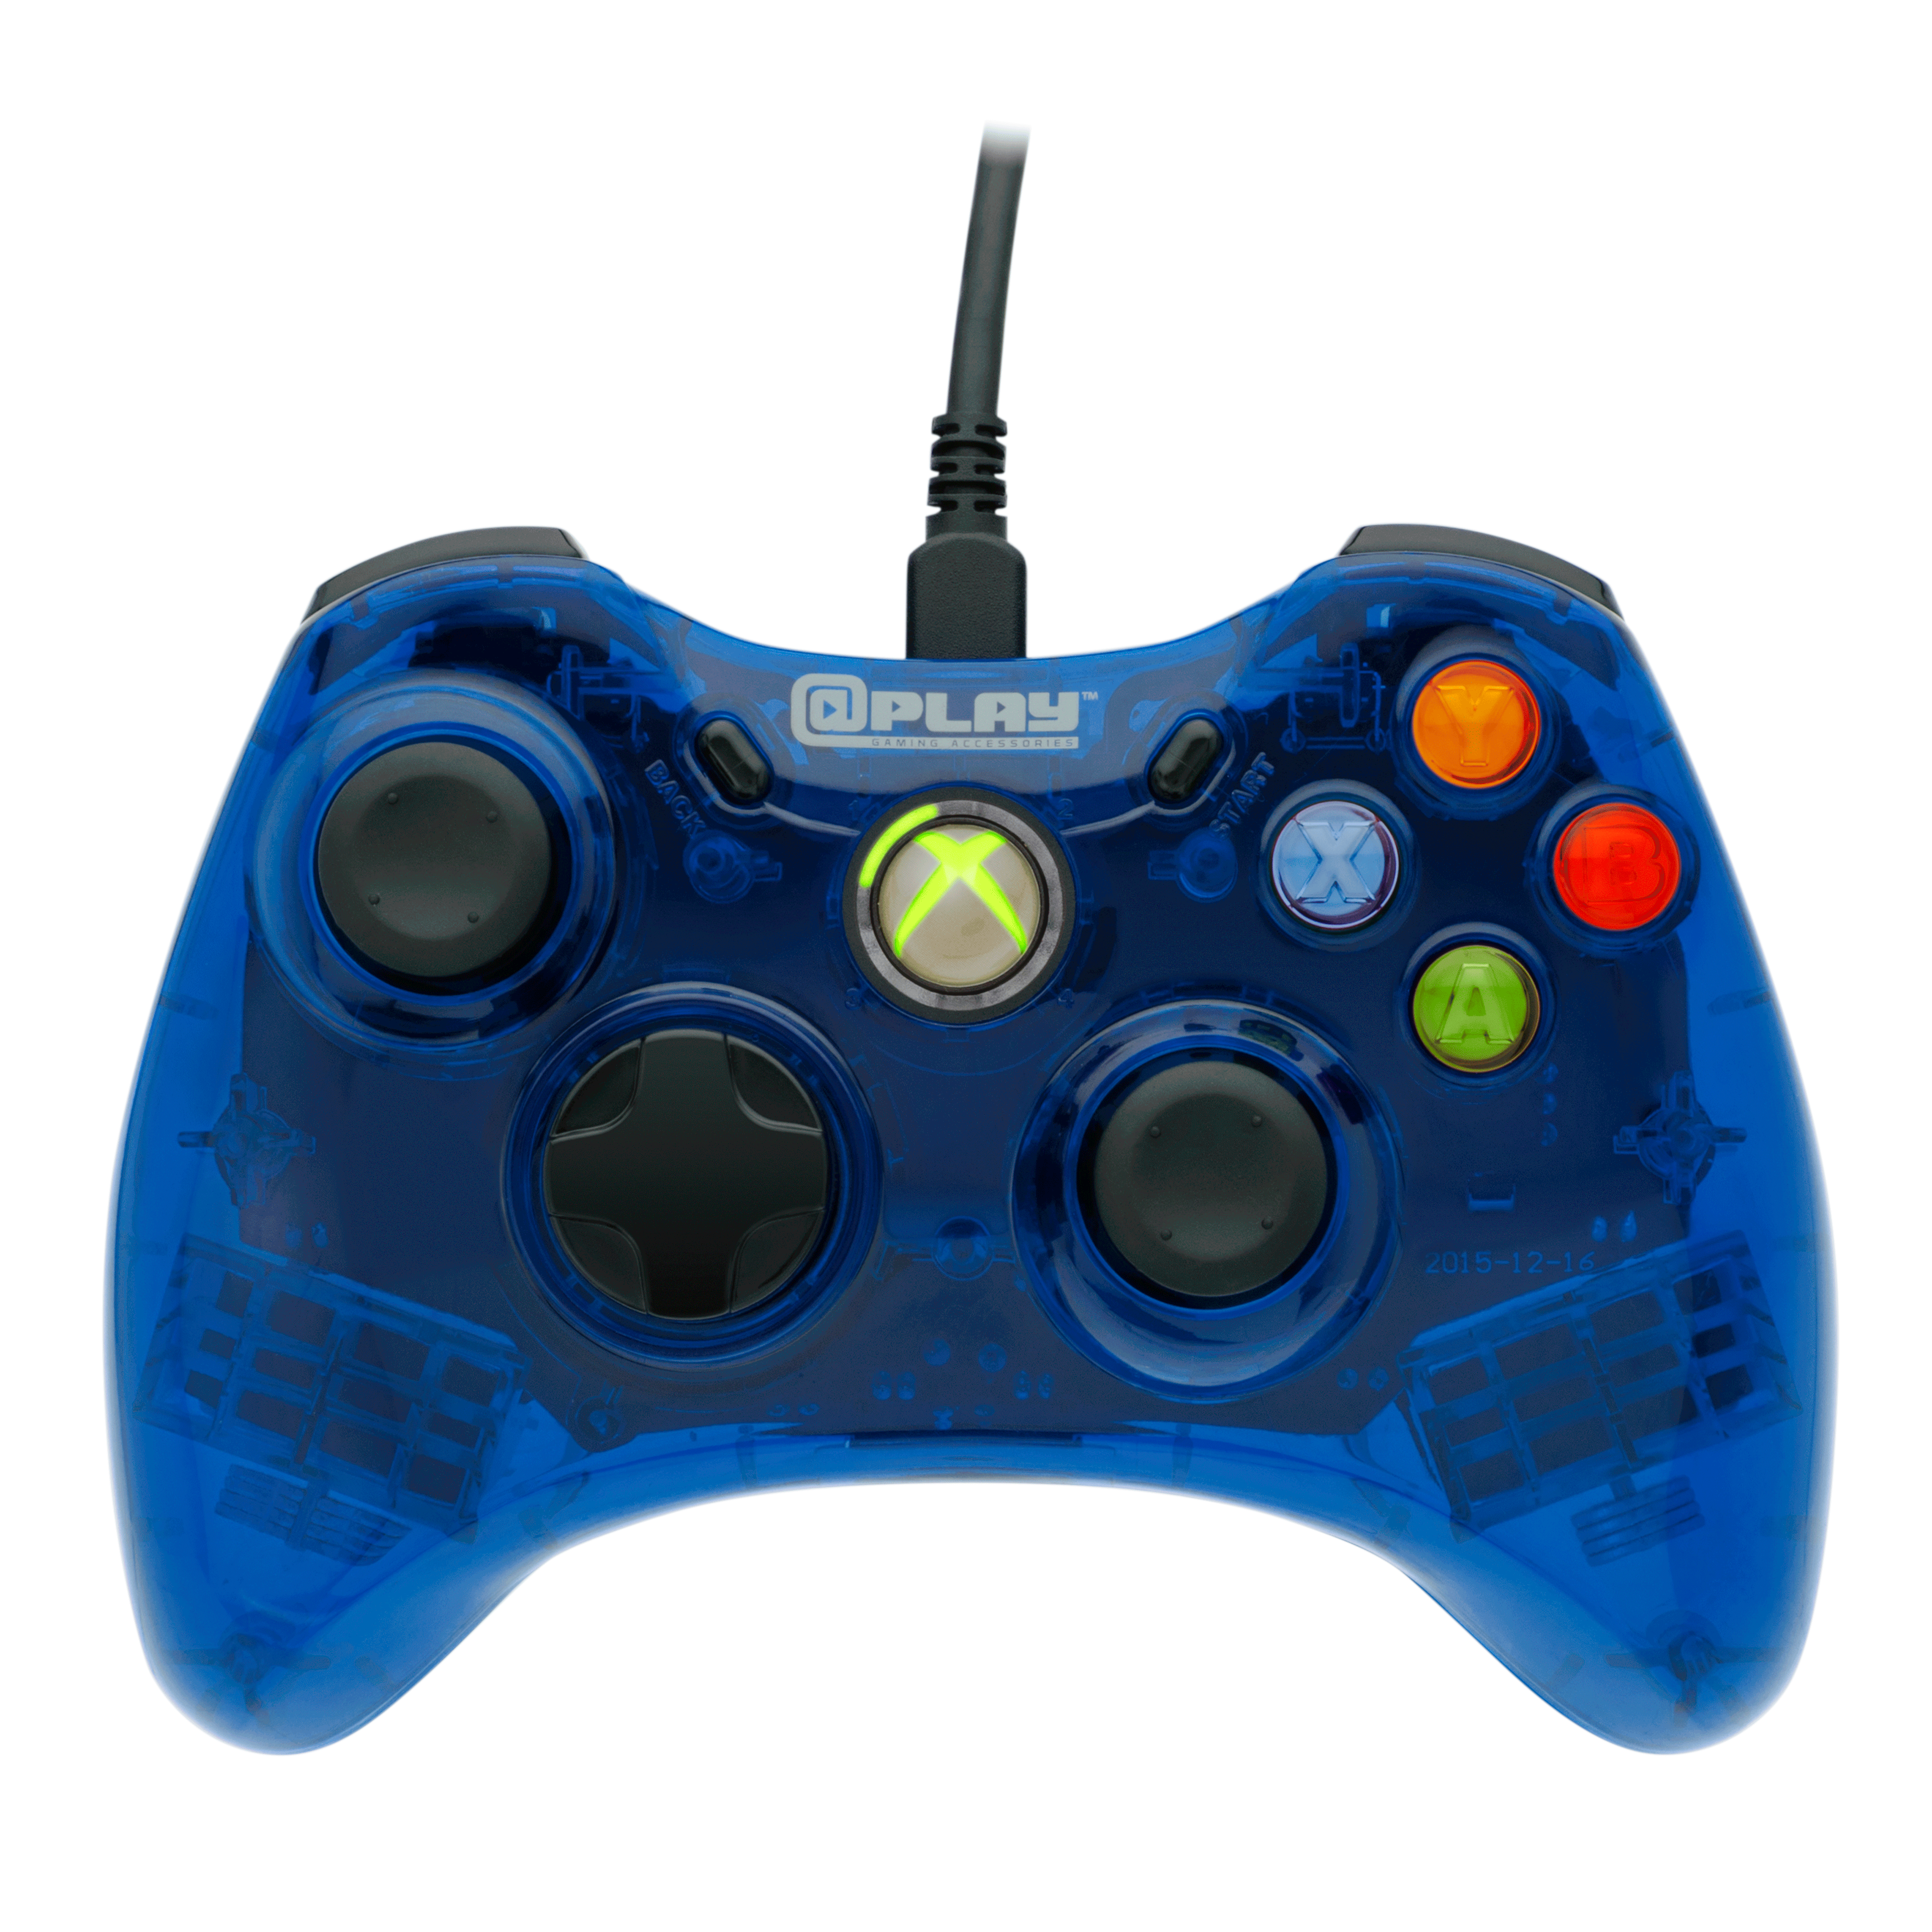 play gaming accessories xbox 360 controller